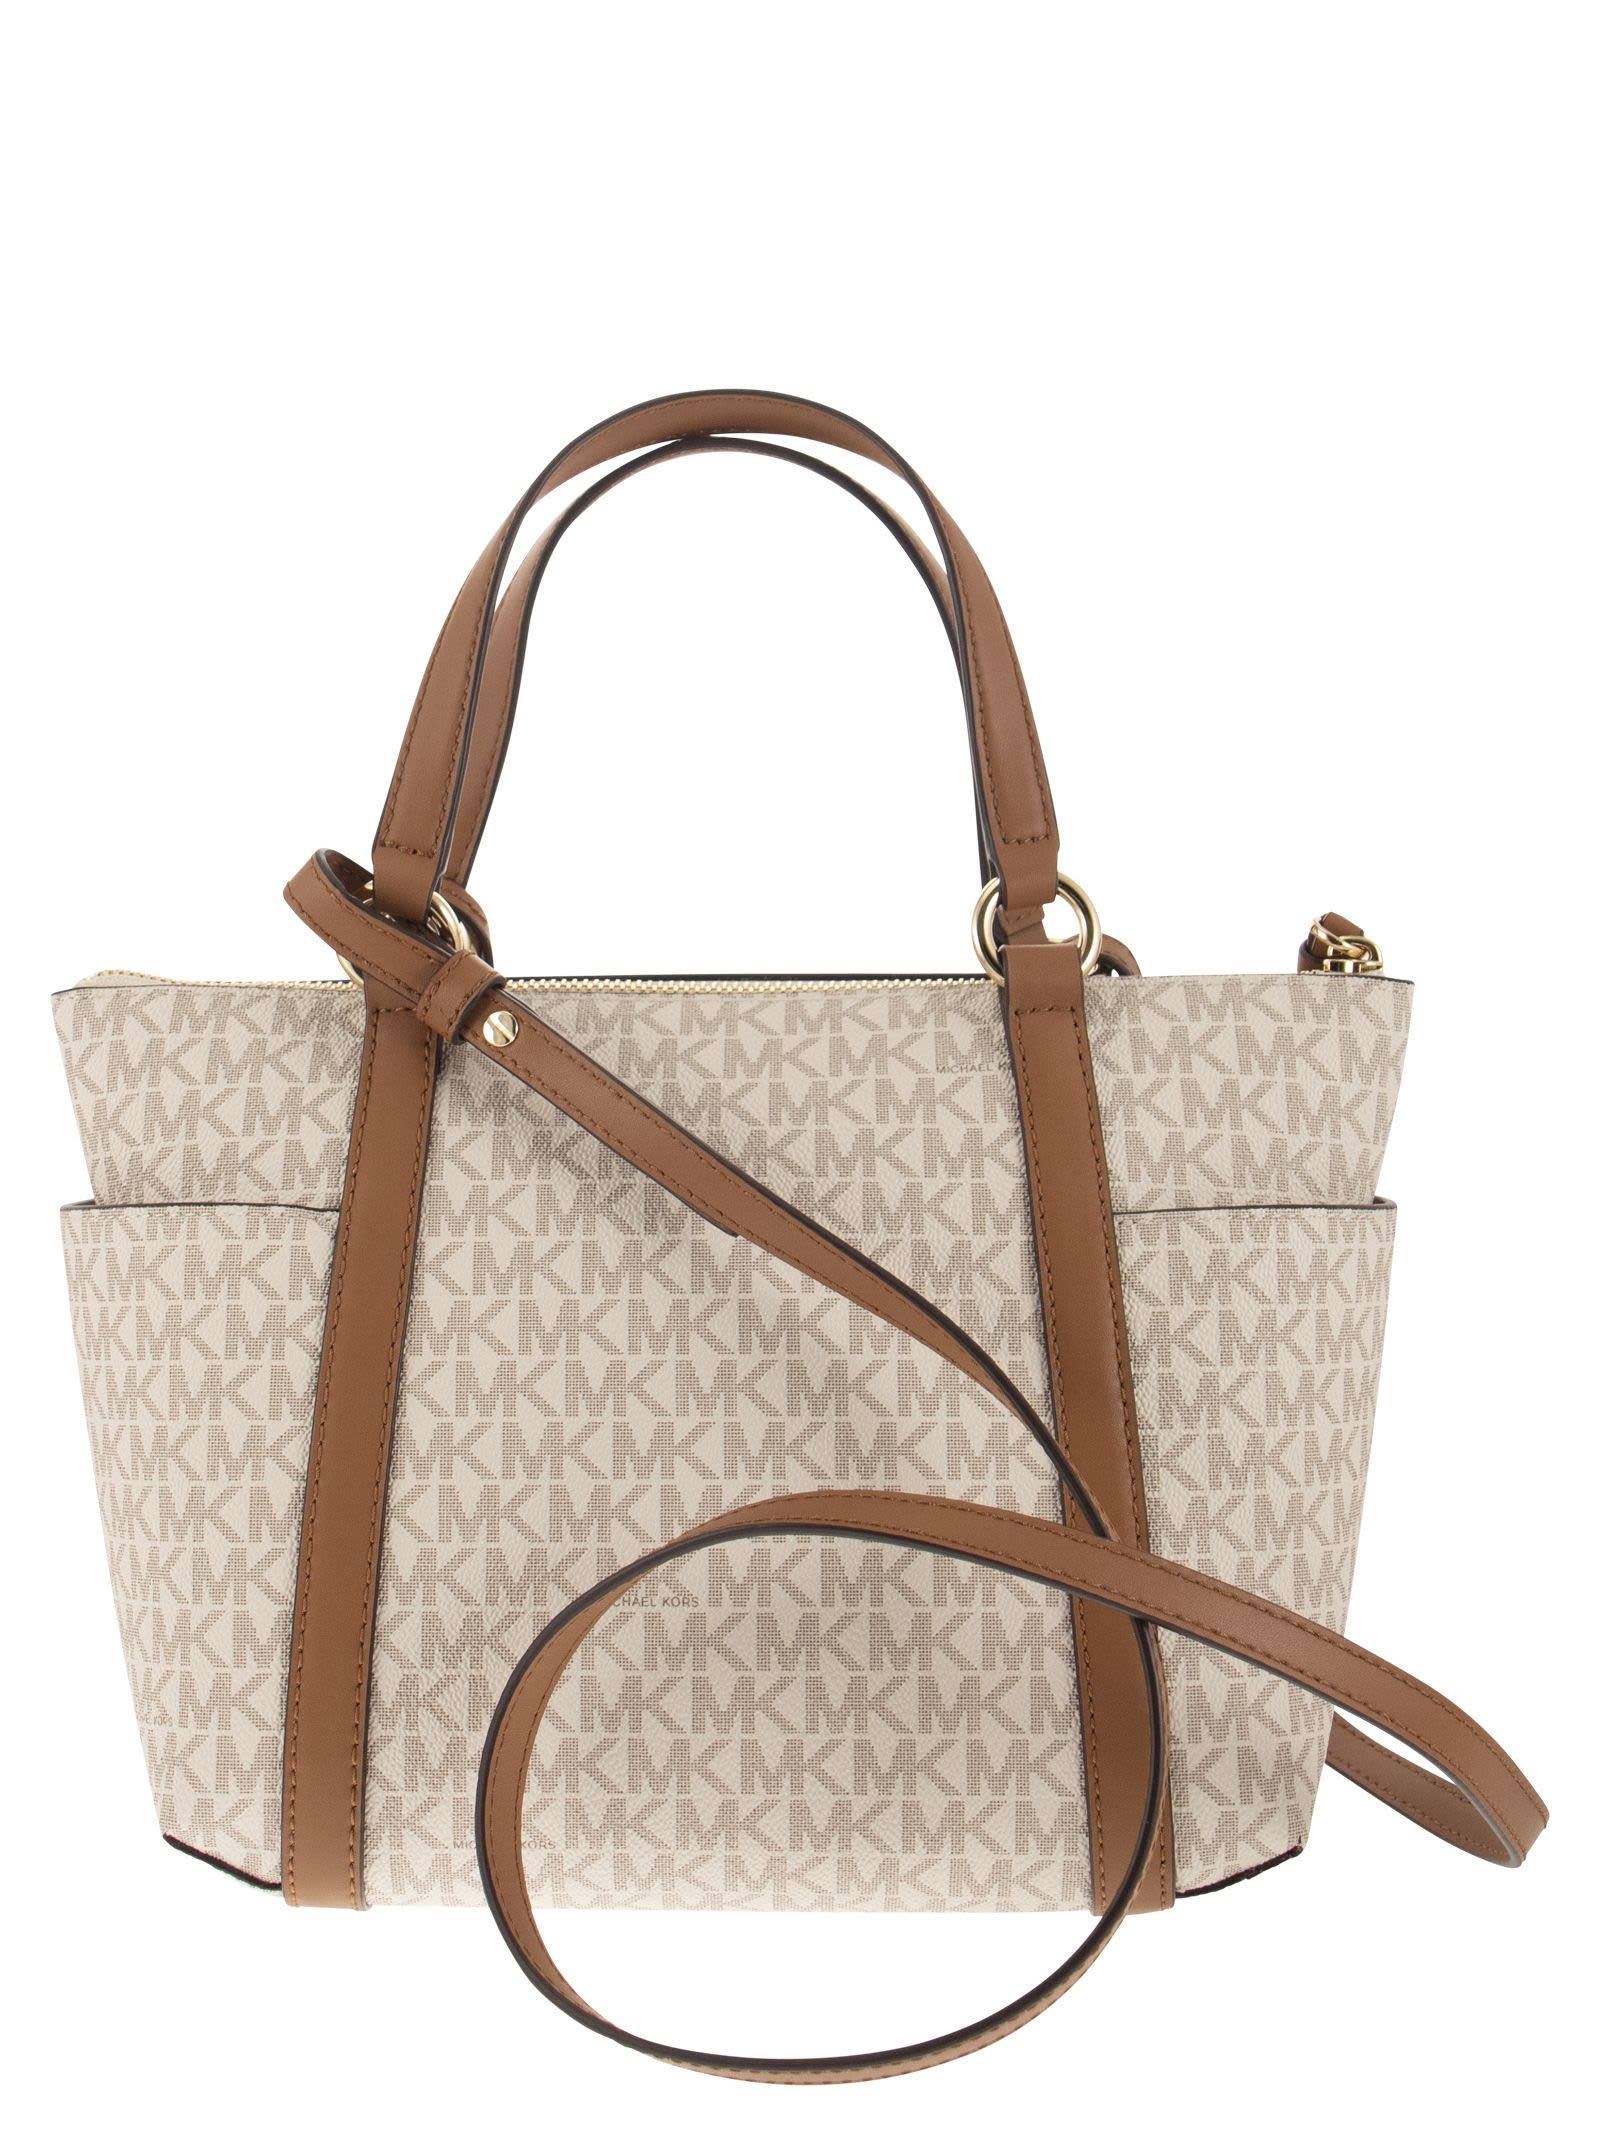 Michael Kors Sullivan - Small Tote Bag With Zip And Logo In